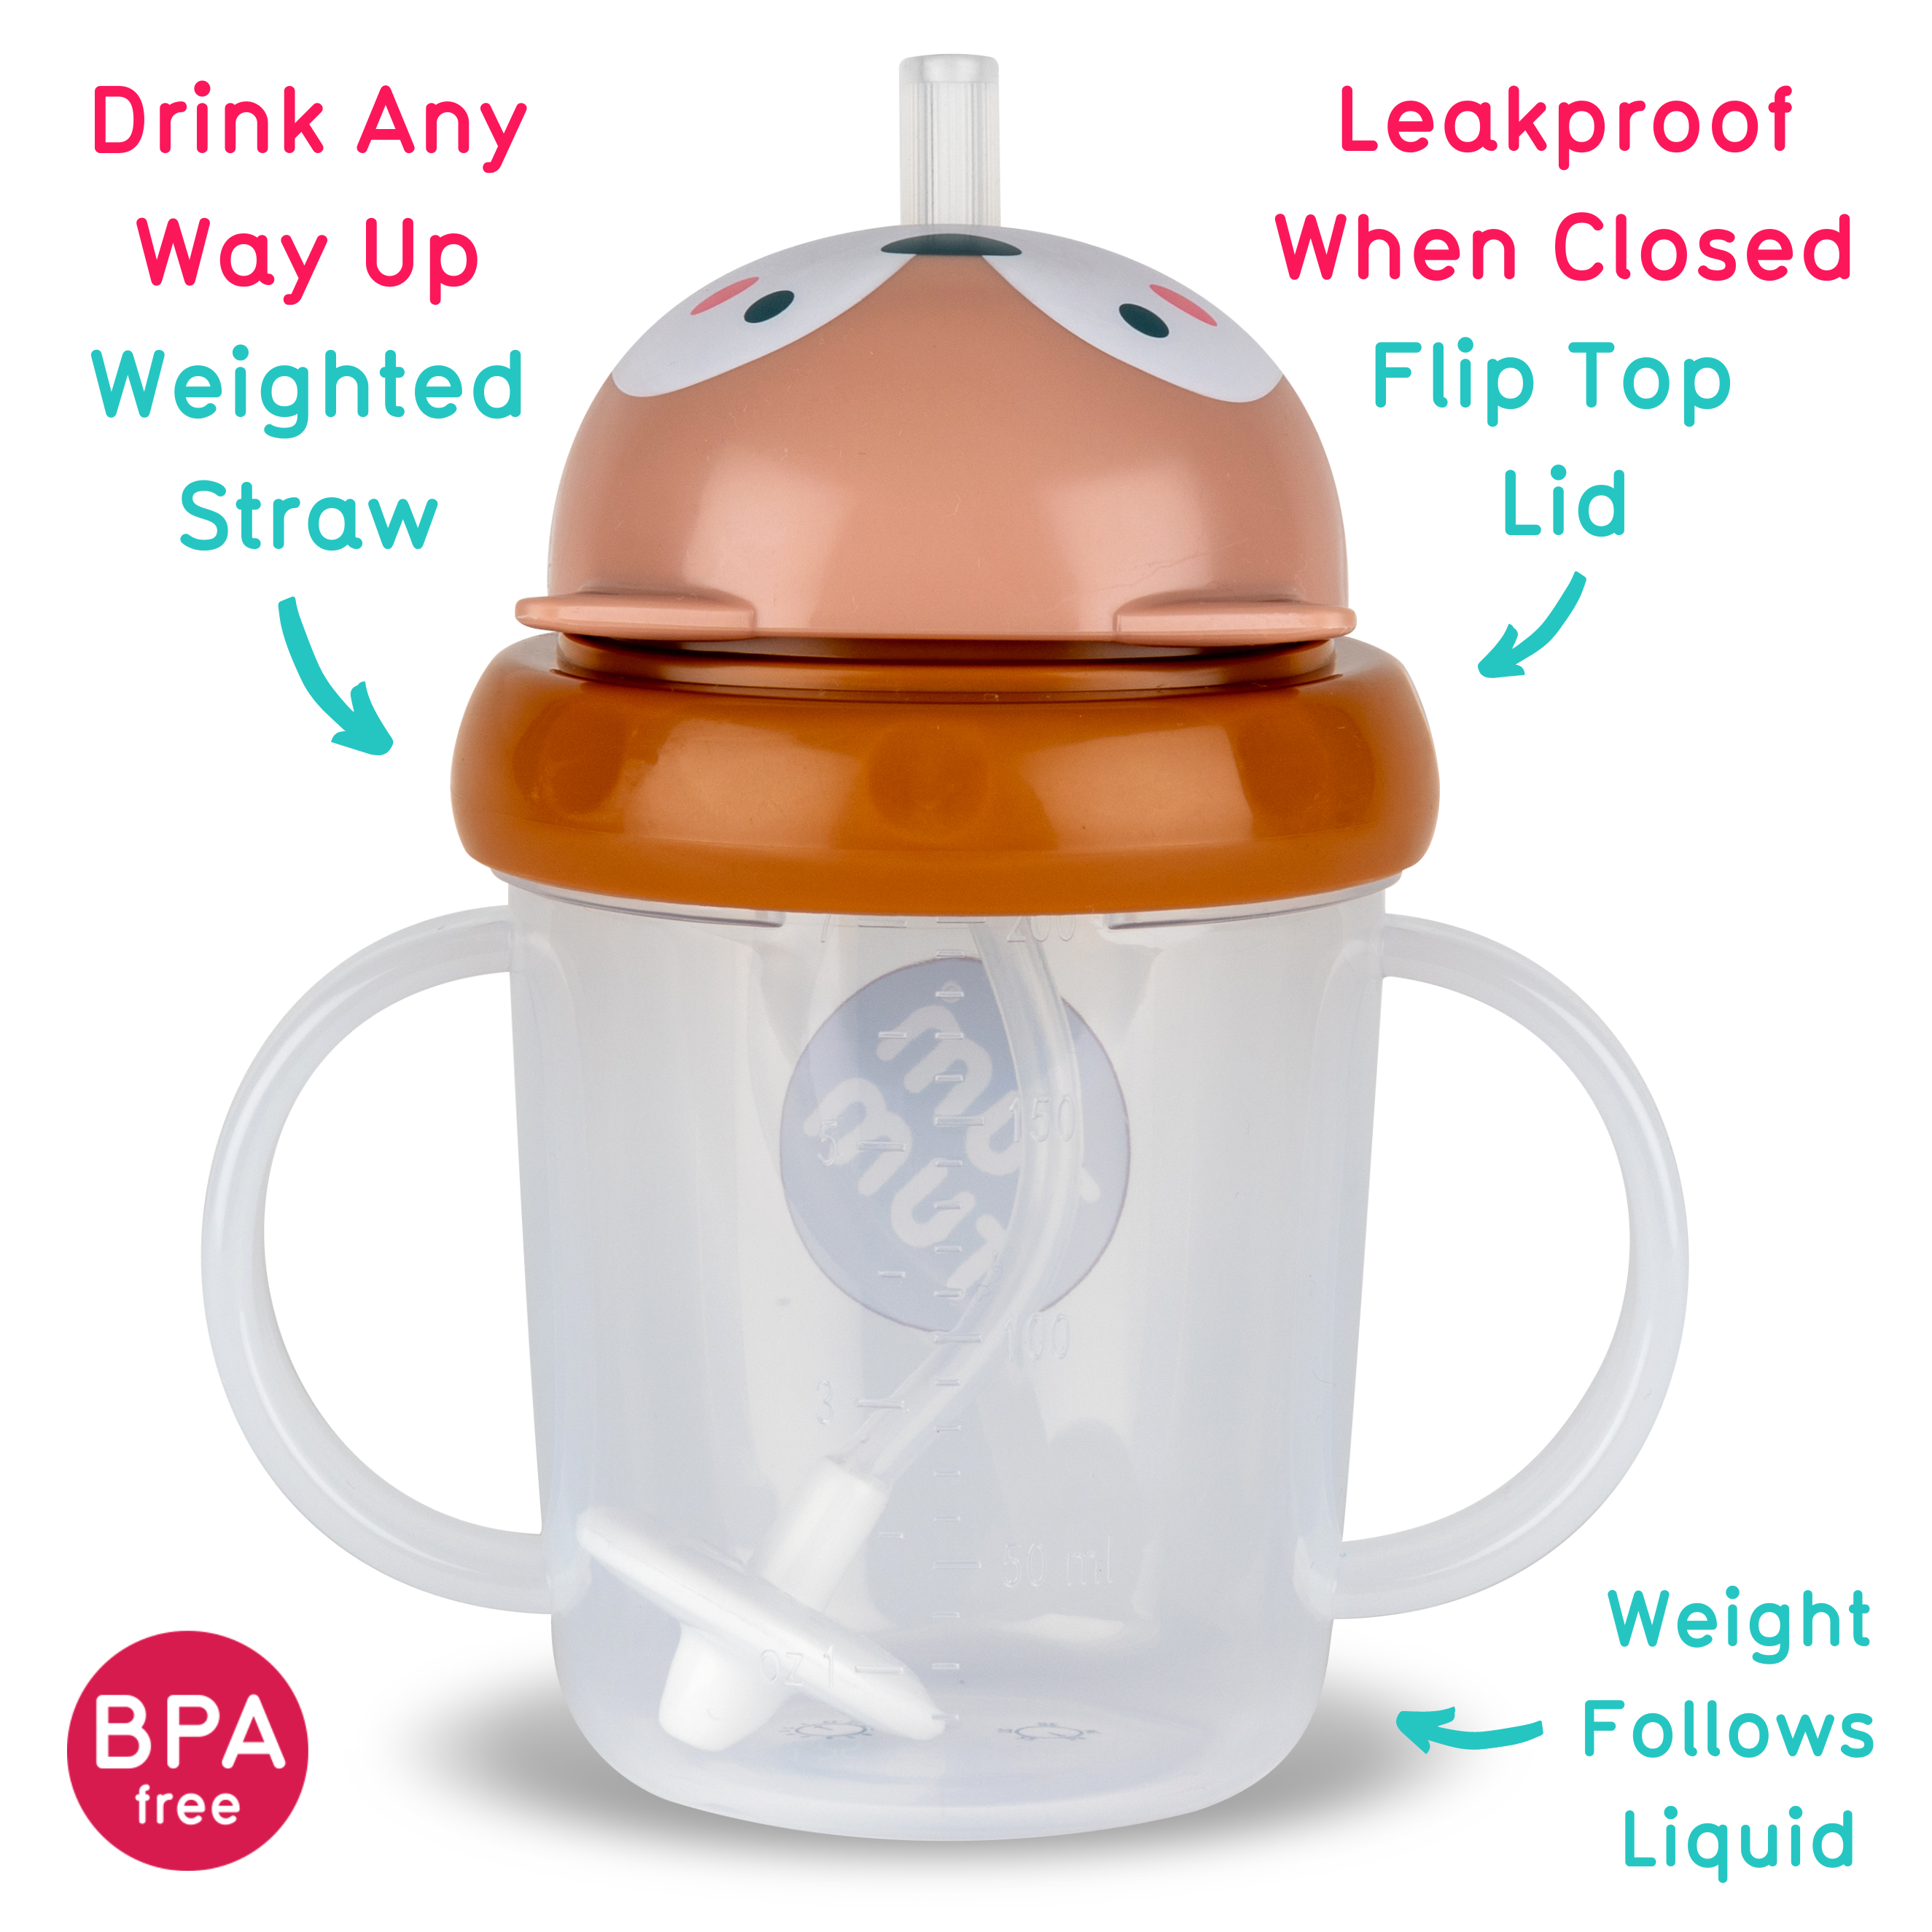 Your Complete Guide to Baby & Toddler Cups – TUM TUM TOTS